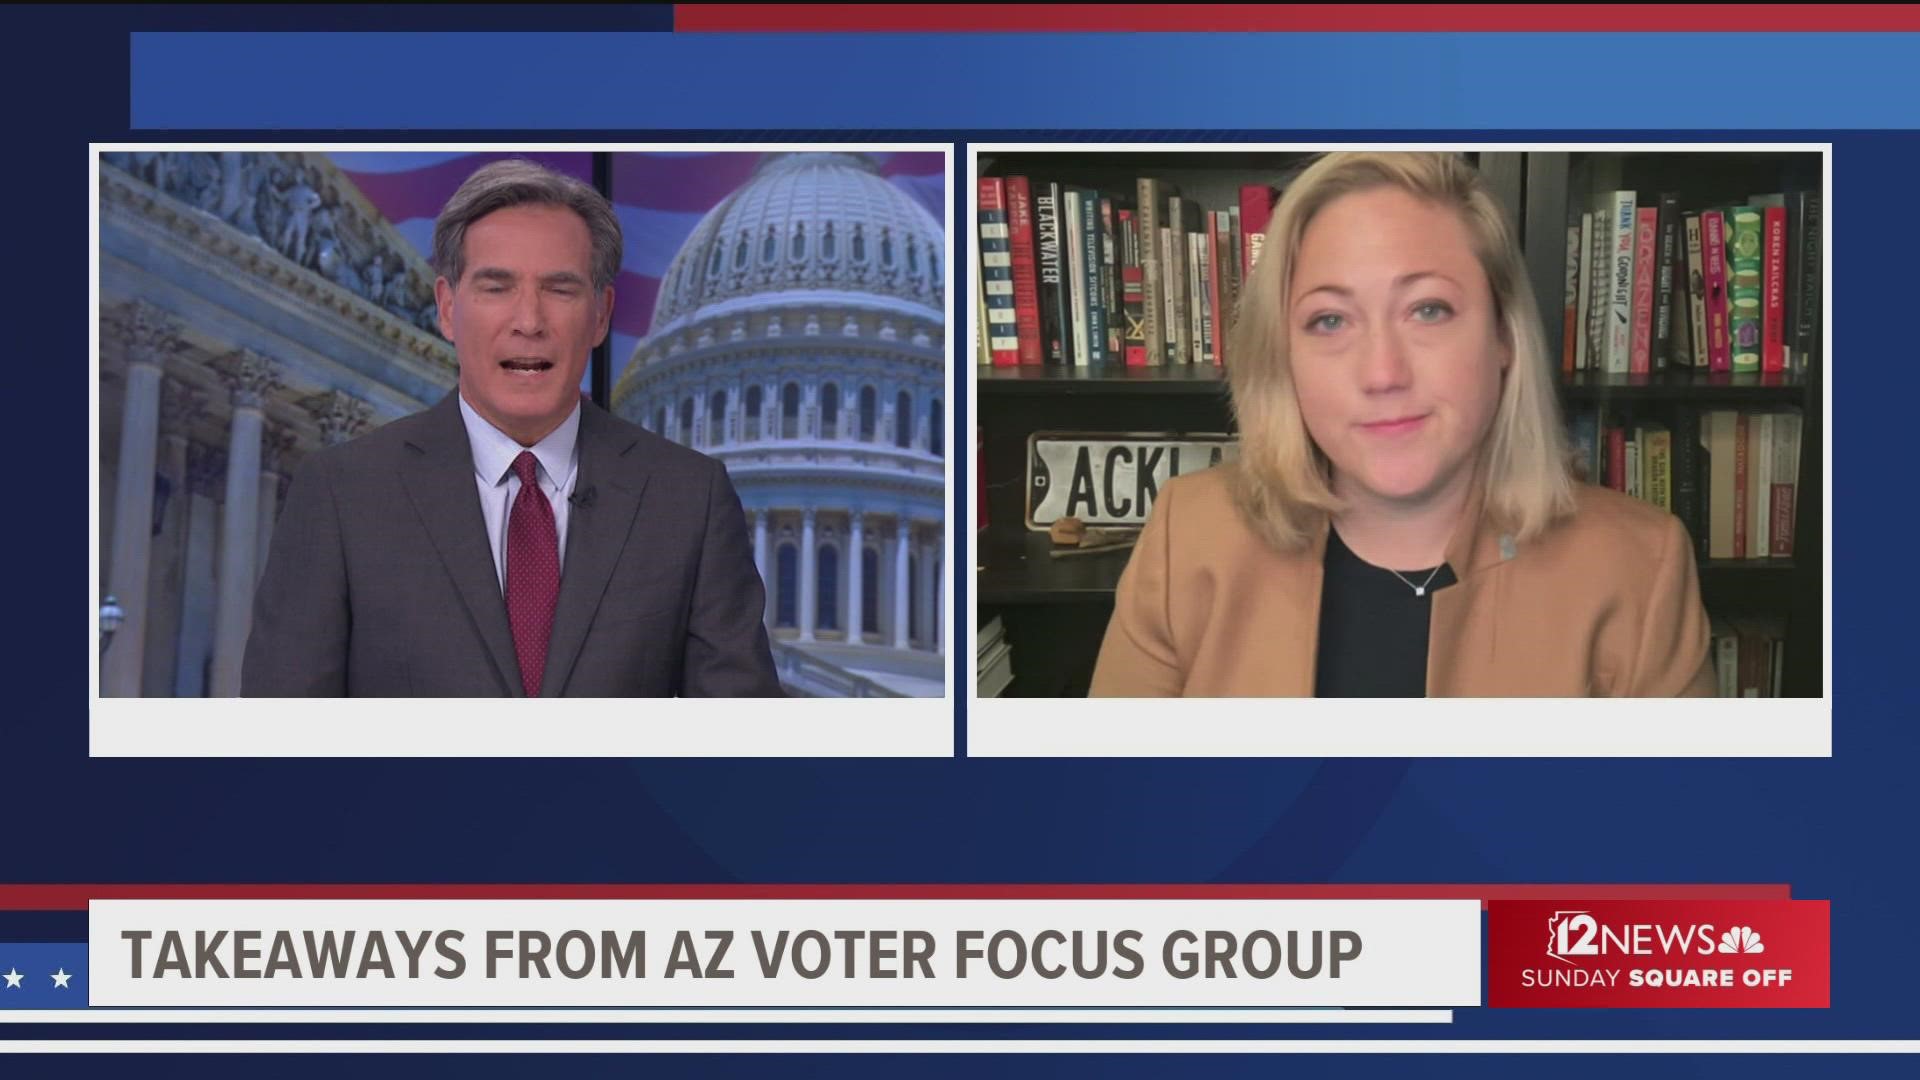 Sarah Longwell, publisher of TheBulwark.com, tells 12News what the former Trump voters in her Arizona focus group reveal about the governor's race.